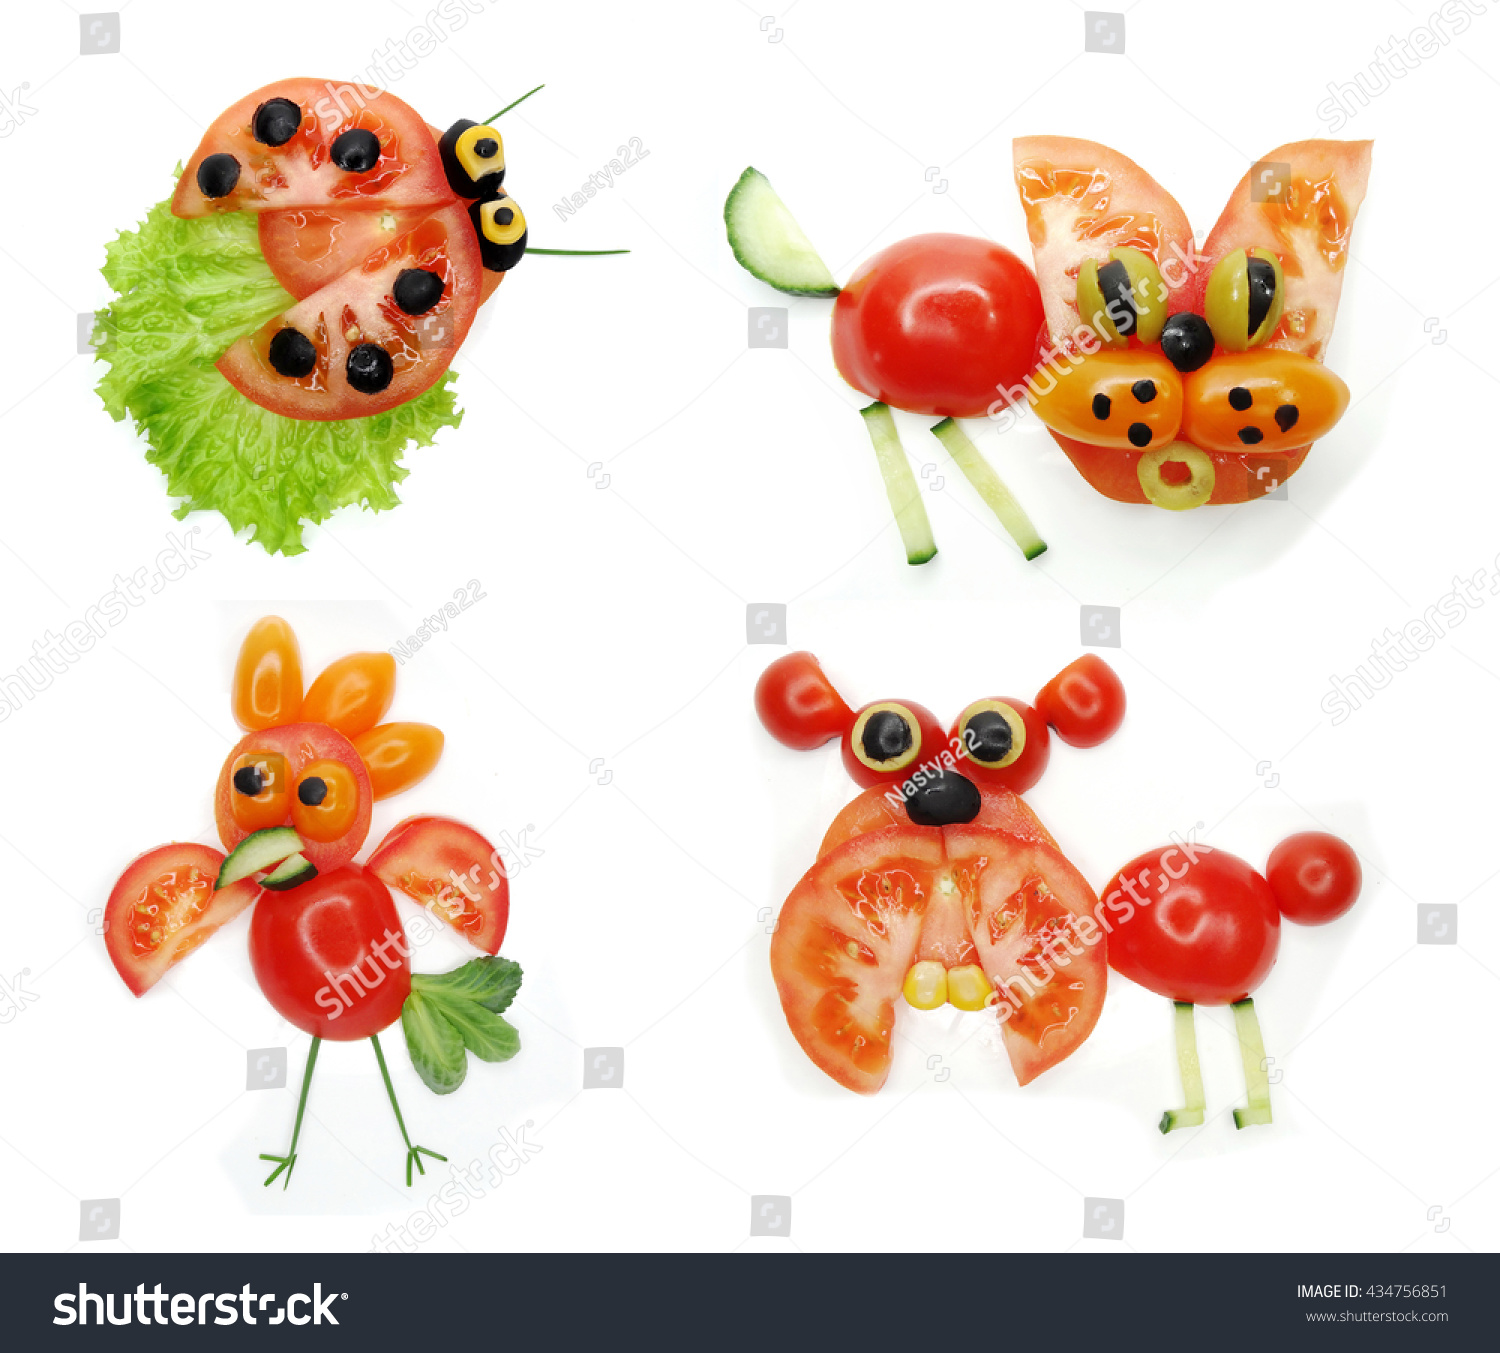 creative funny vegetable food snack with tomato lady-bird form #434756851